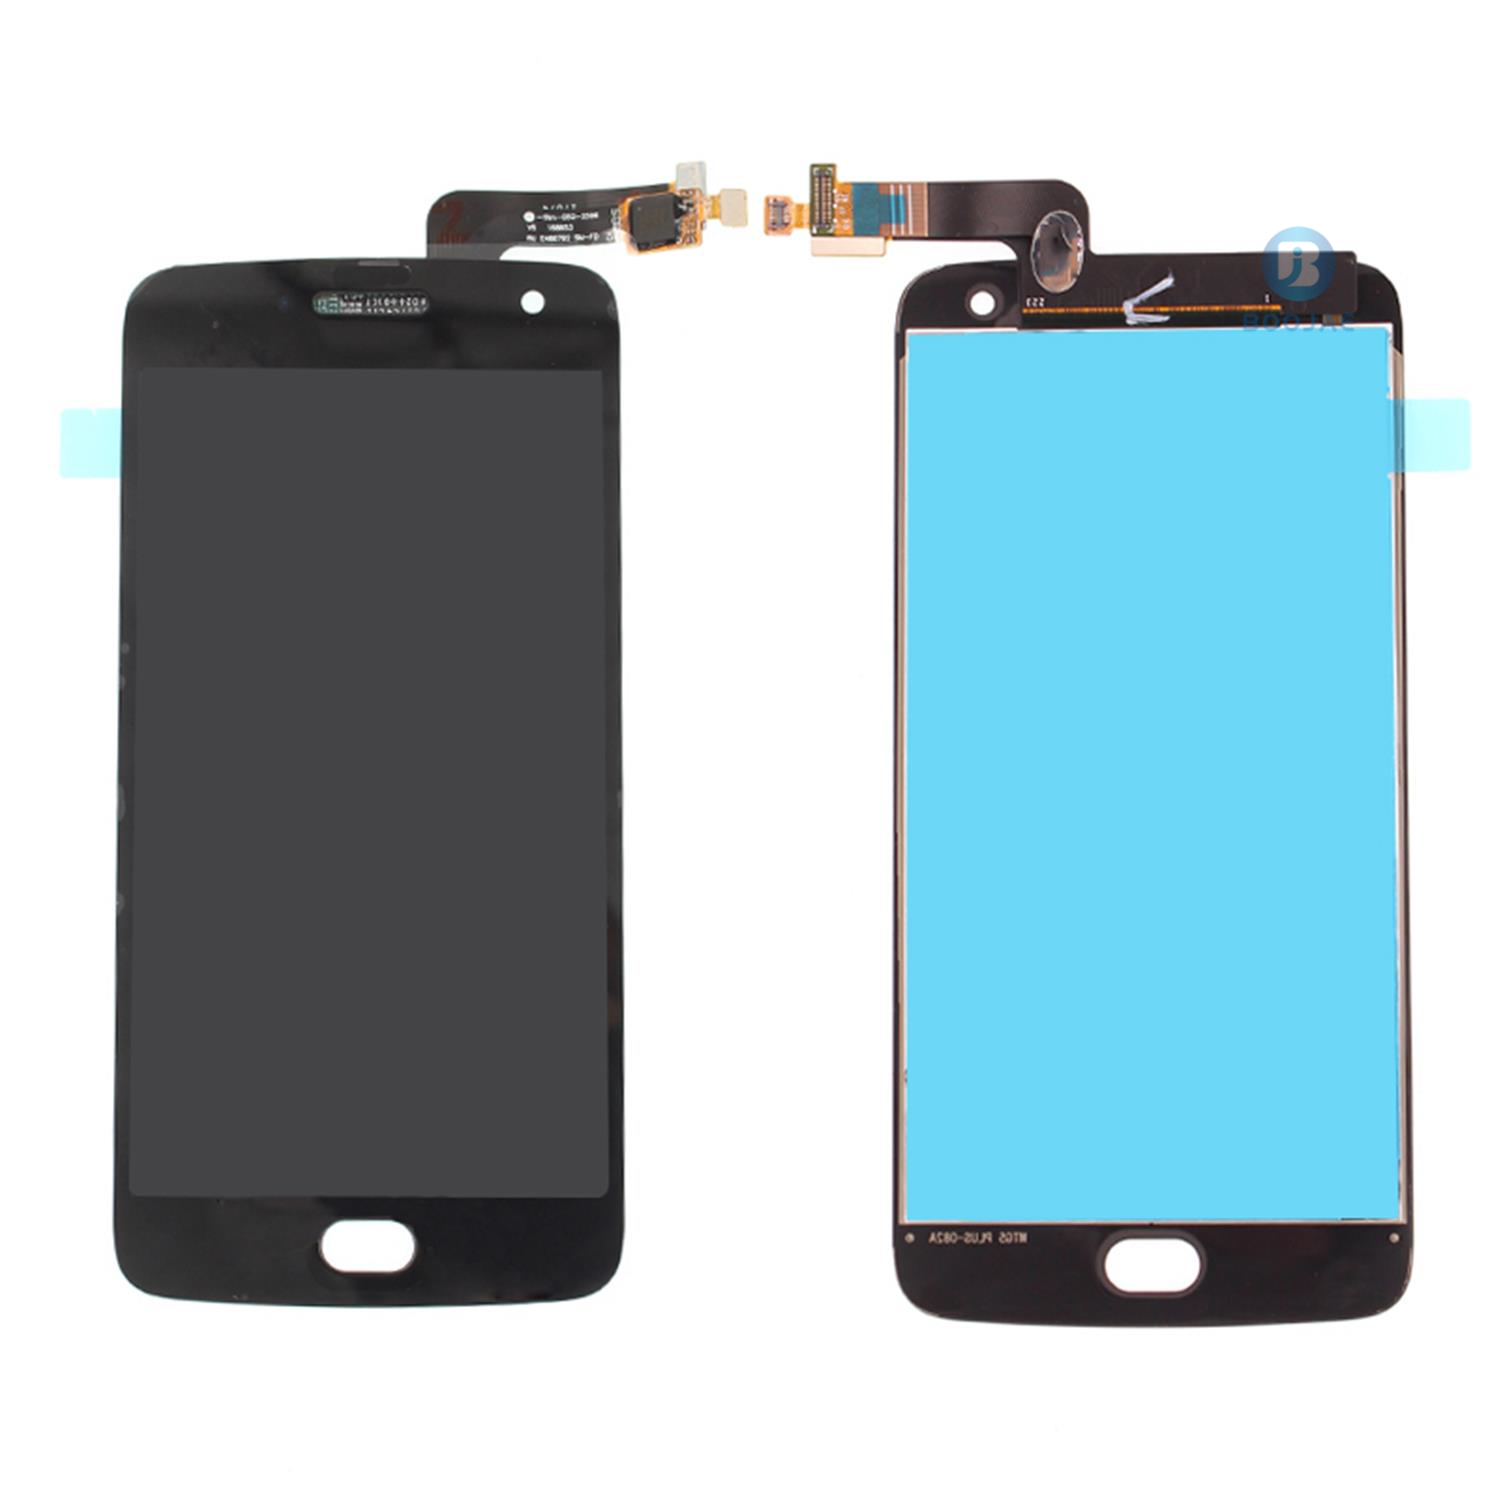 For Motorola Moto G5 Plus LCD Screen Display and Touch Panel Digitizer Assembly Replacement